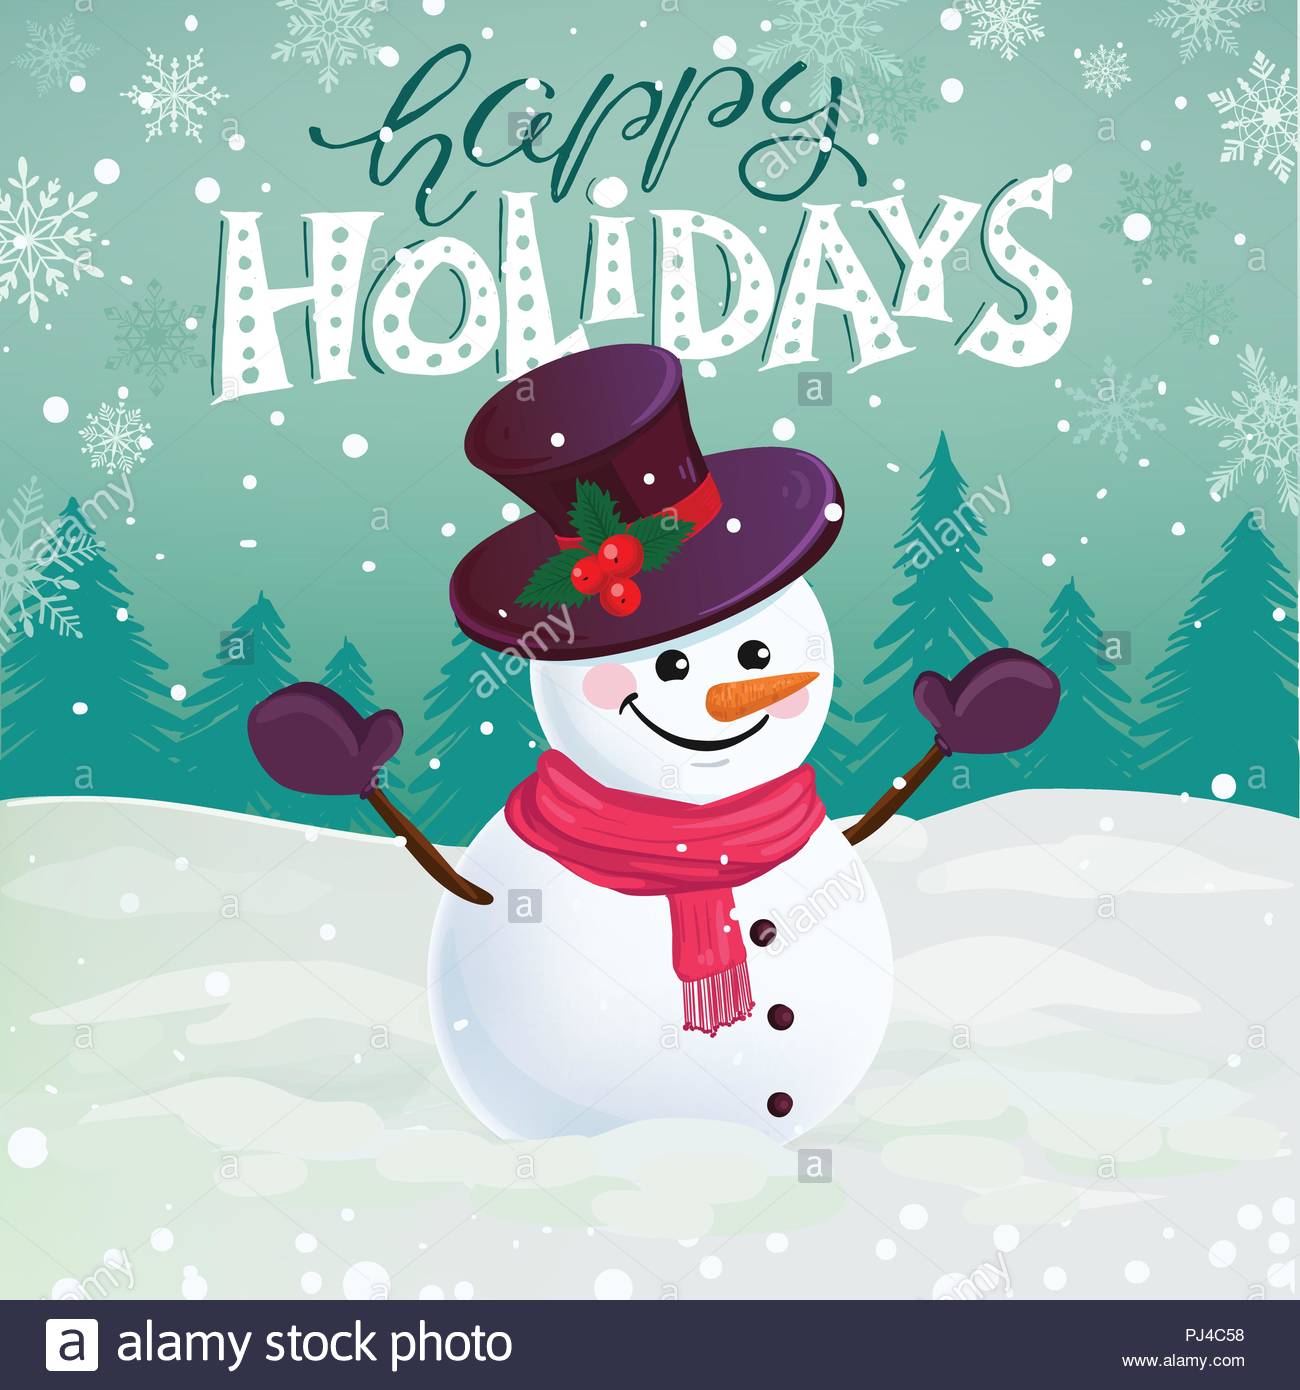 Funny Snowman In Hat Scarf And Mittens On Snowy Background With